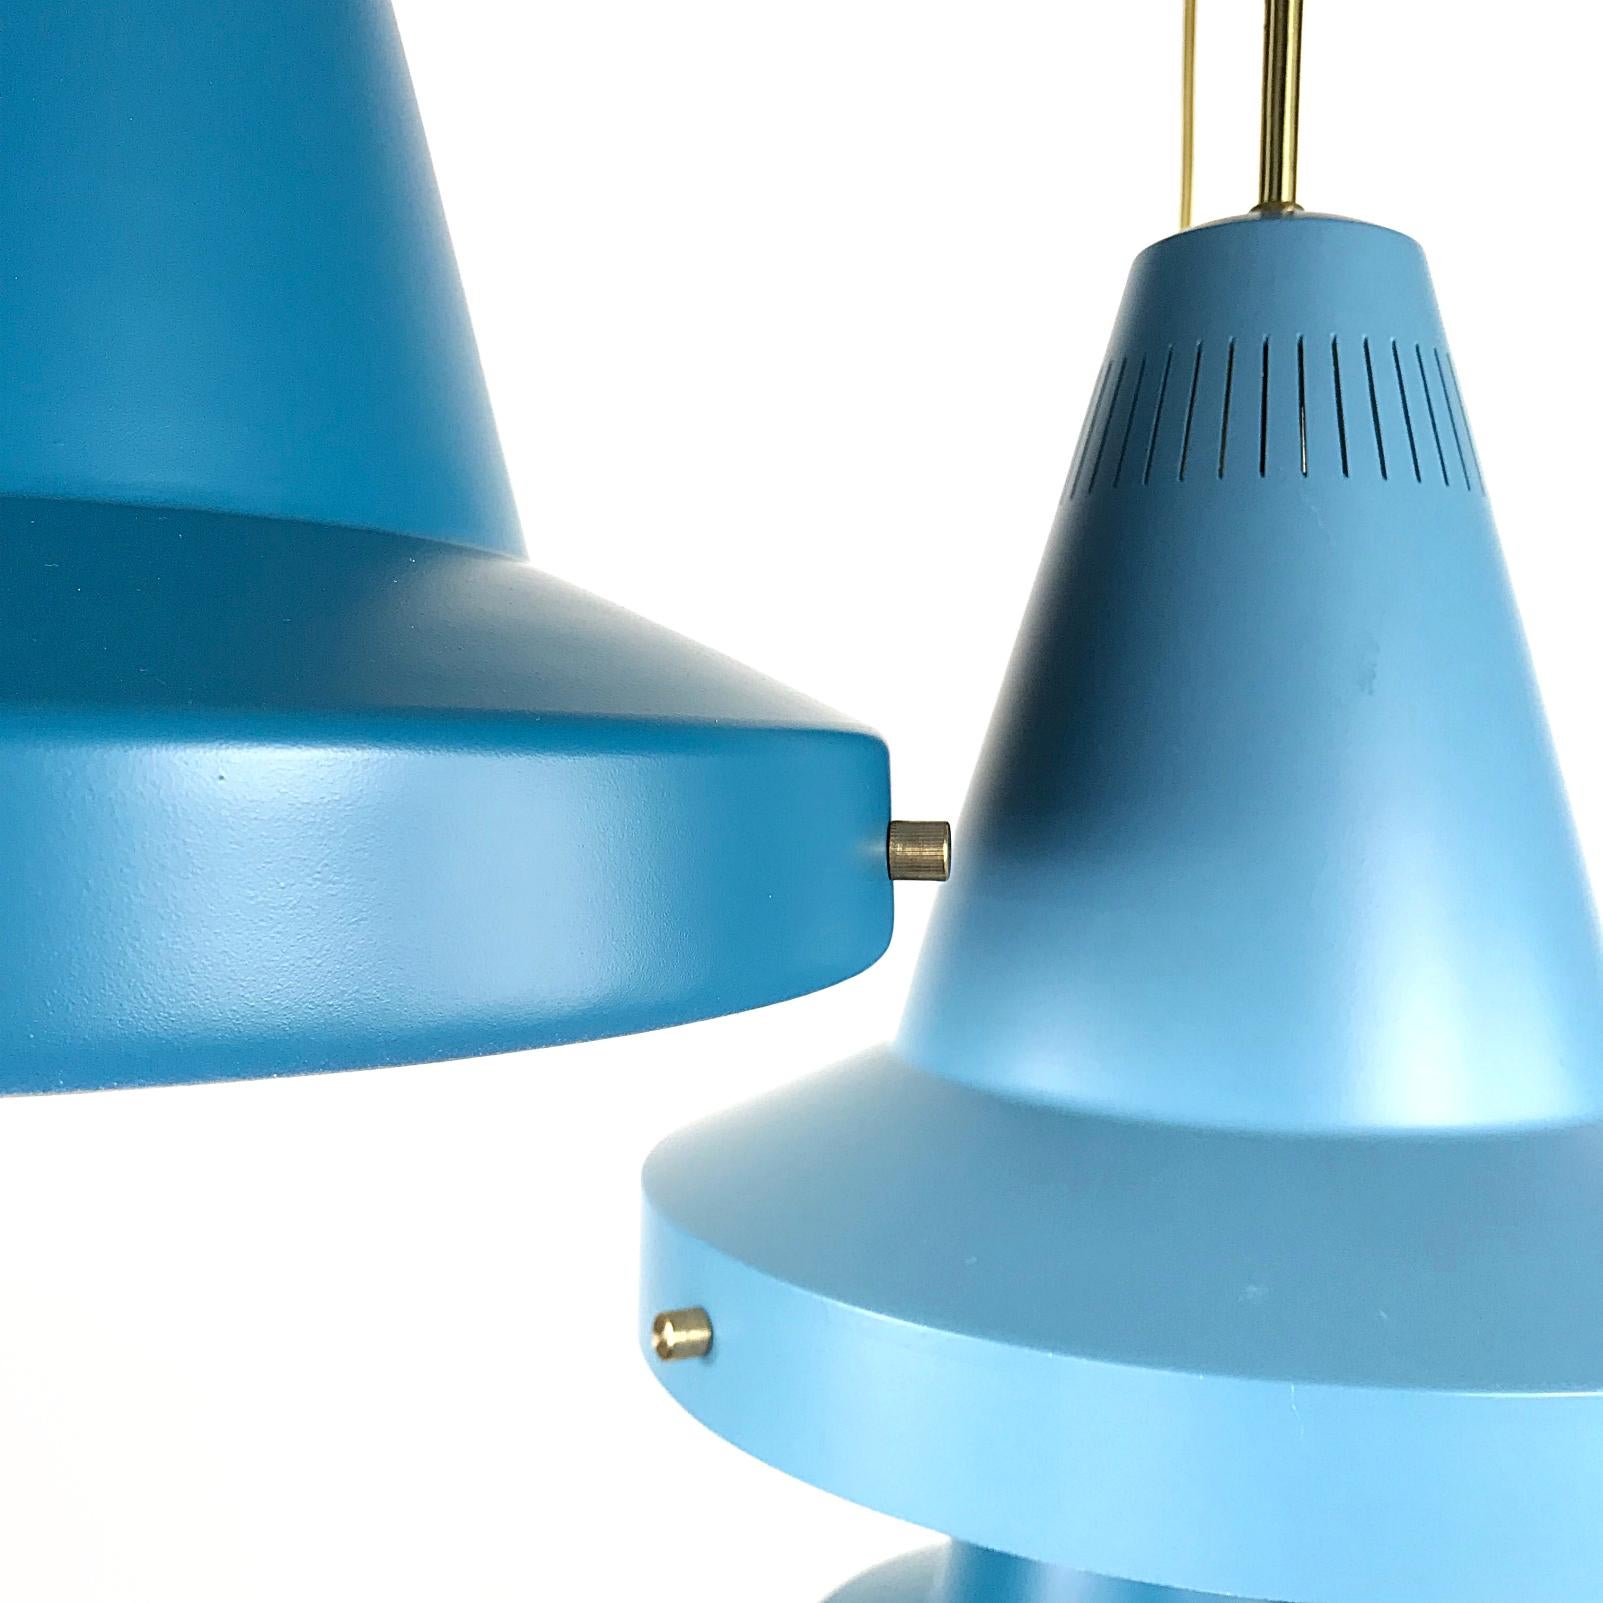 Beautiful Mid-Century Modern ceiling lamps. The two light blue lamps are labeled by Stilnovo. The lamps are a little different in color - two of them are light blue, the other two are darker. This lamp is a striking appearance in any room. It is a